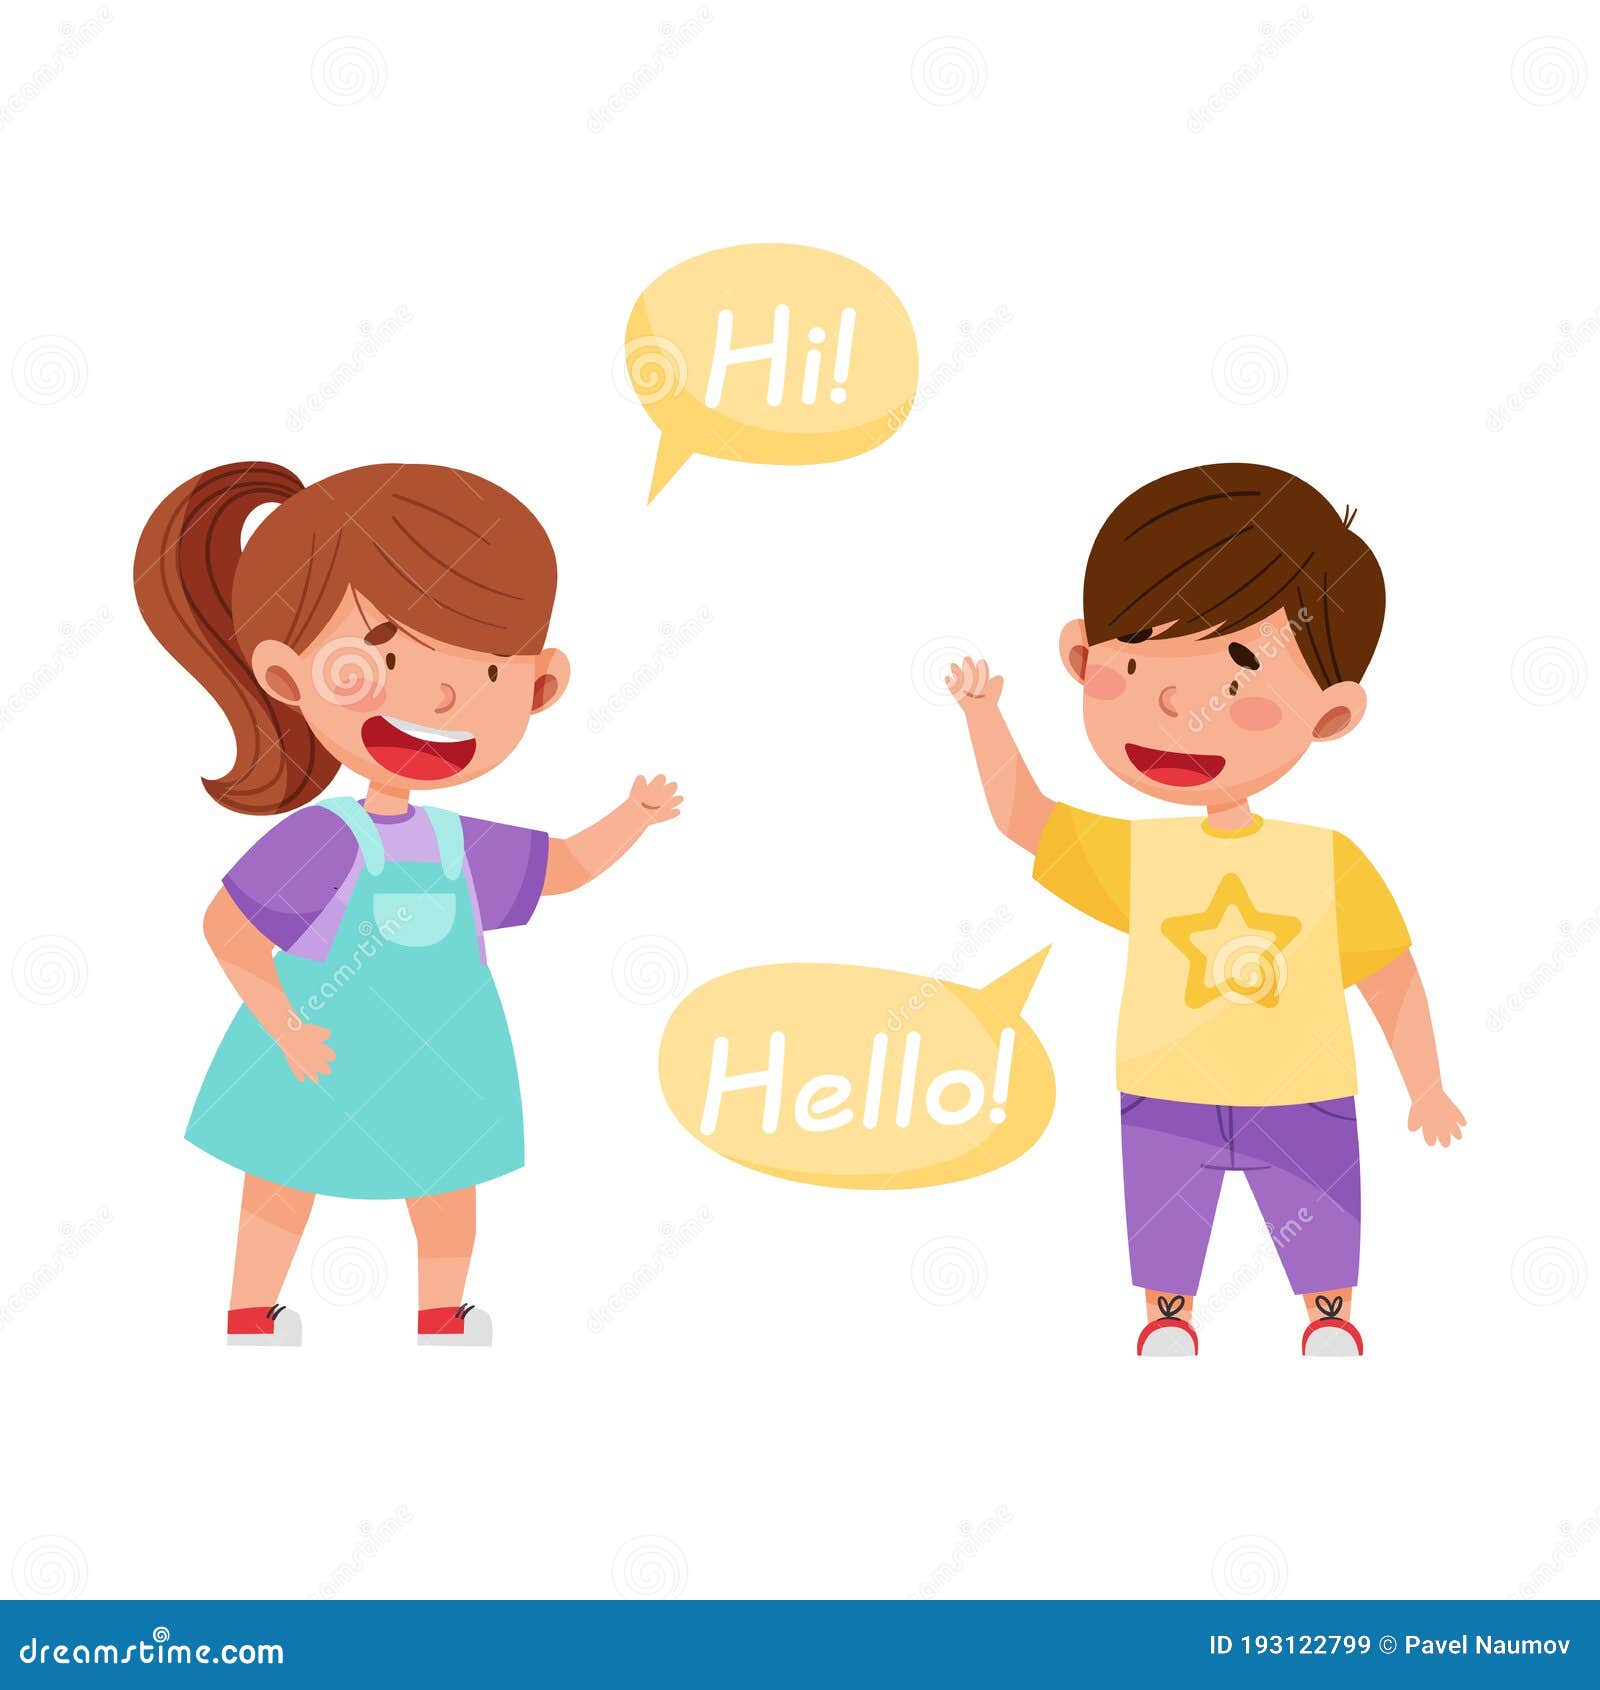 Cheerful Boy And Girl Saying Hello To Each Other Vector Illustration ...